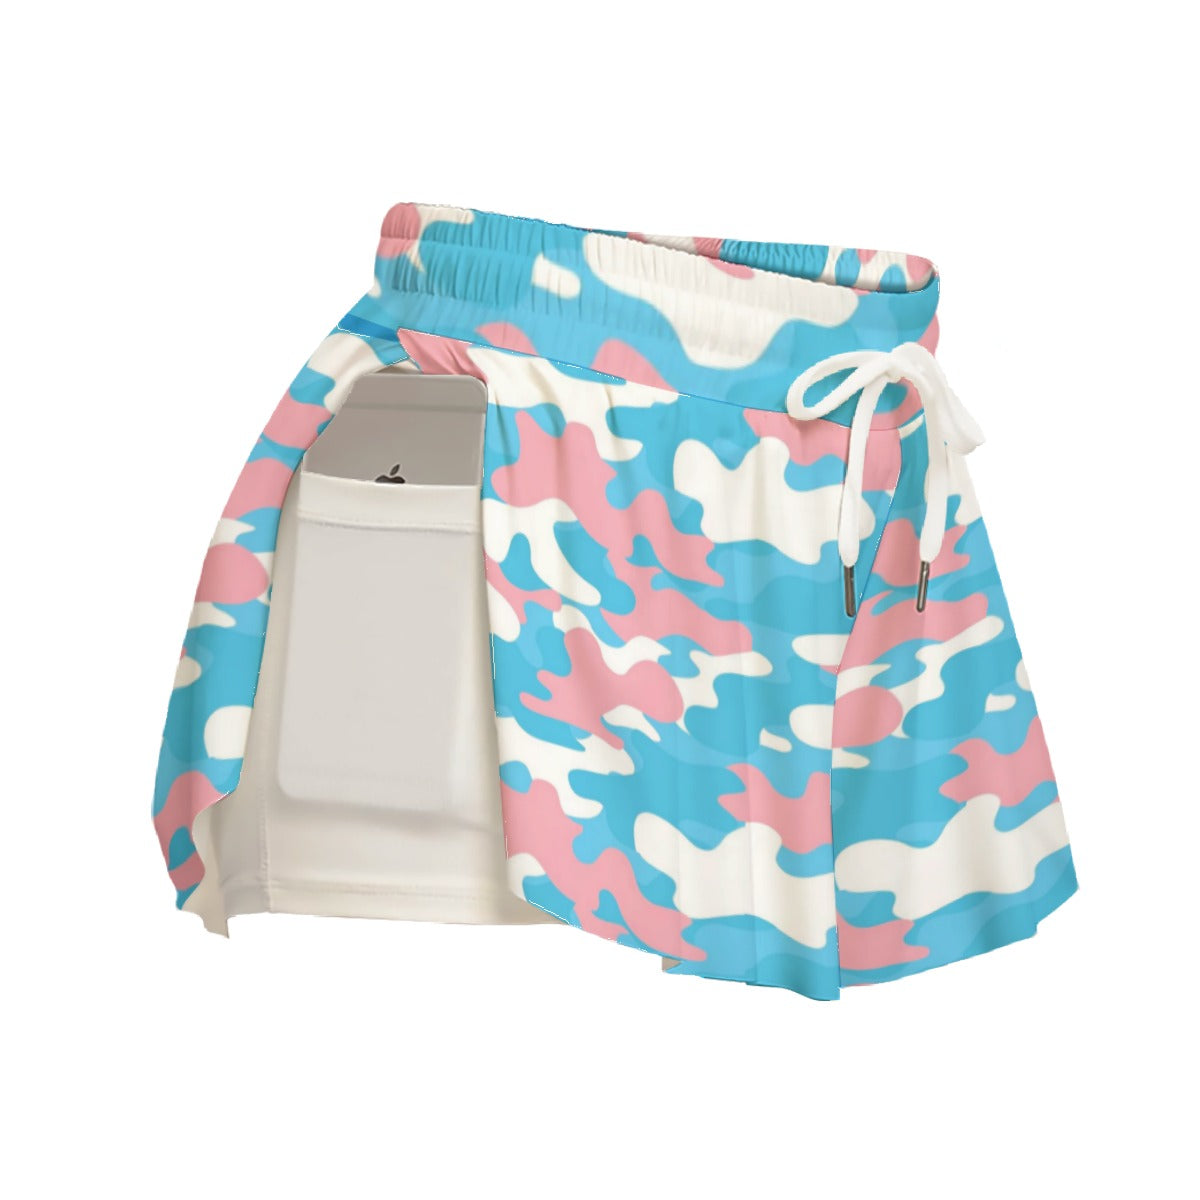 Blue Pink White Pride Camouflage Fitness Sport Culottes